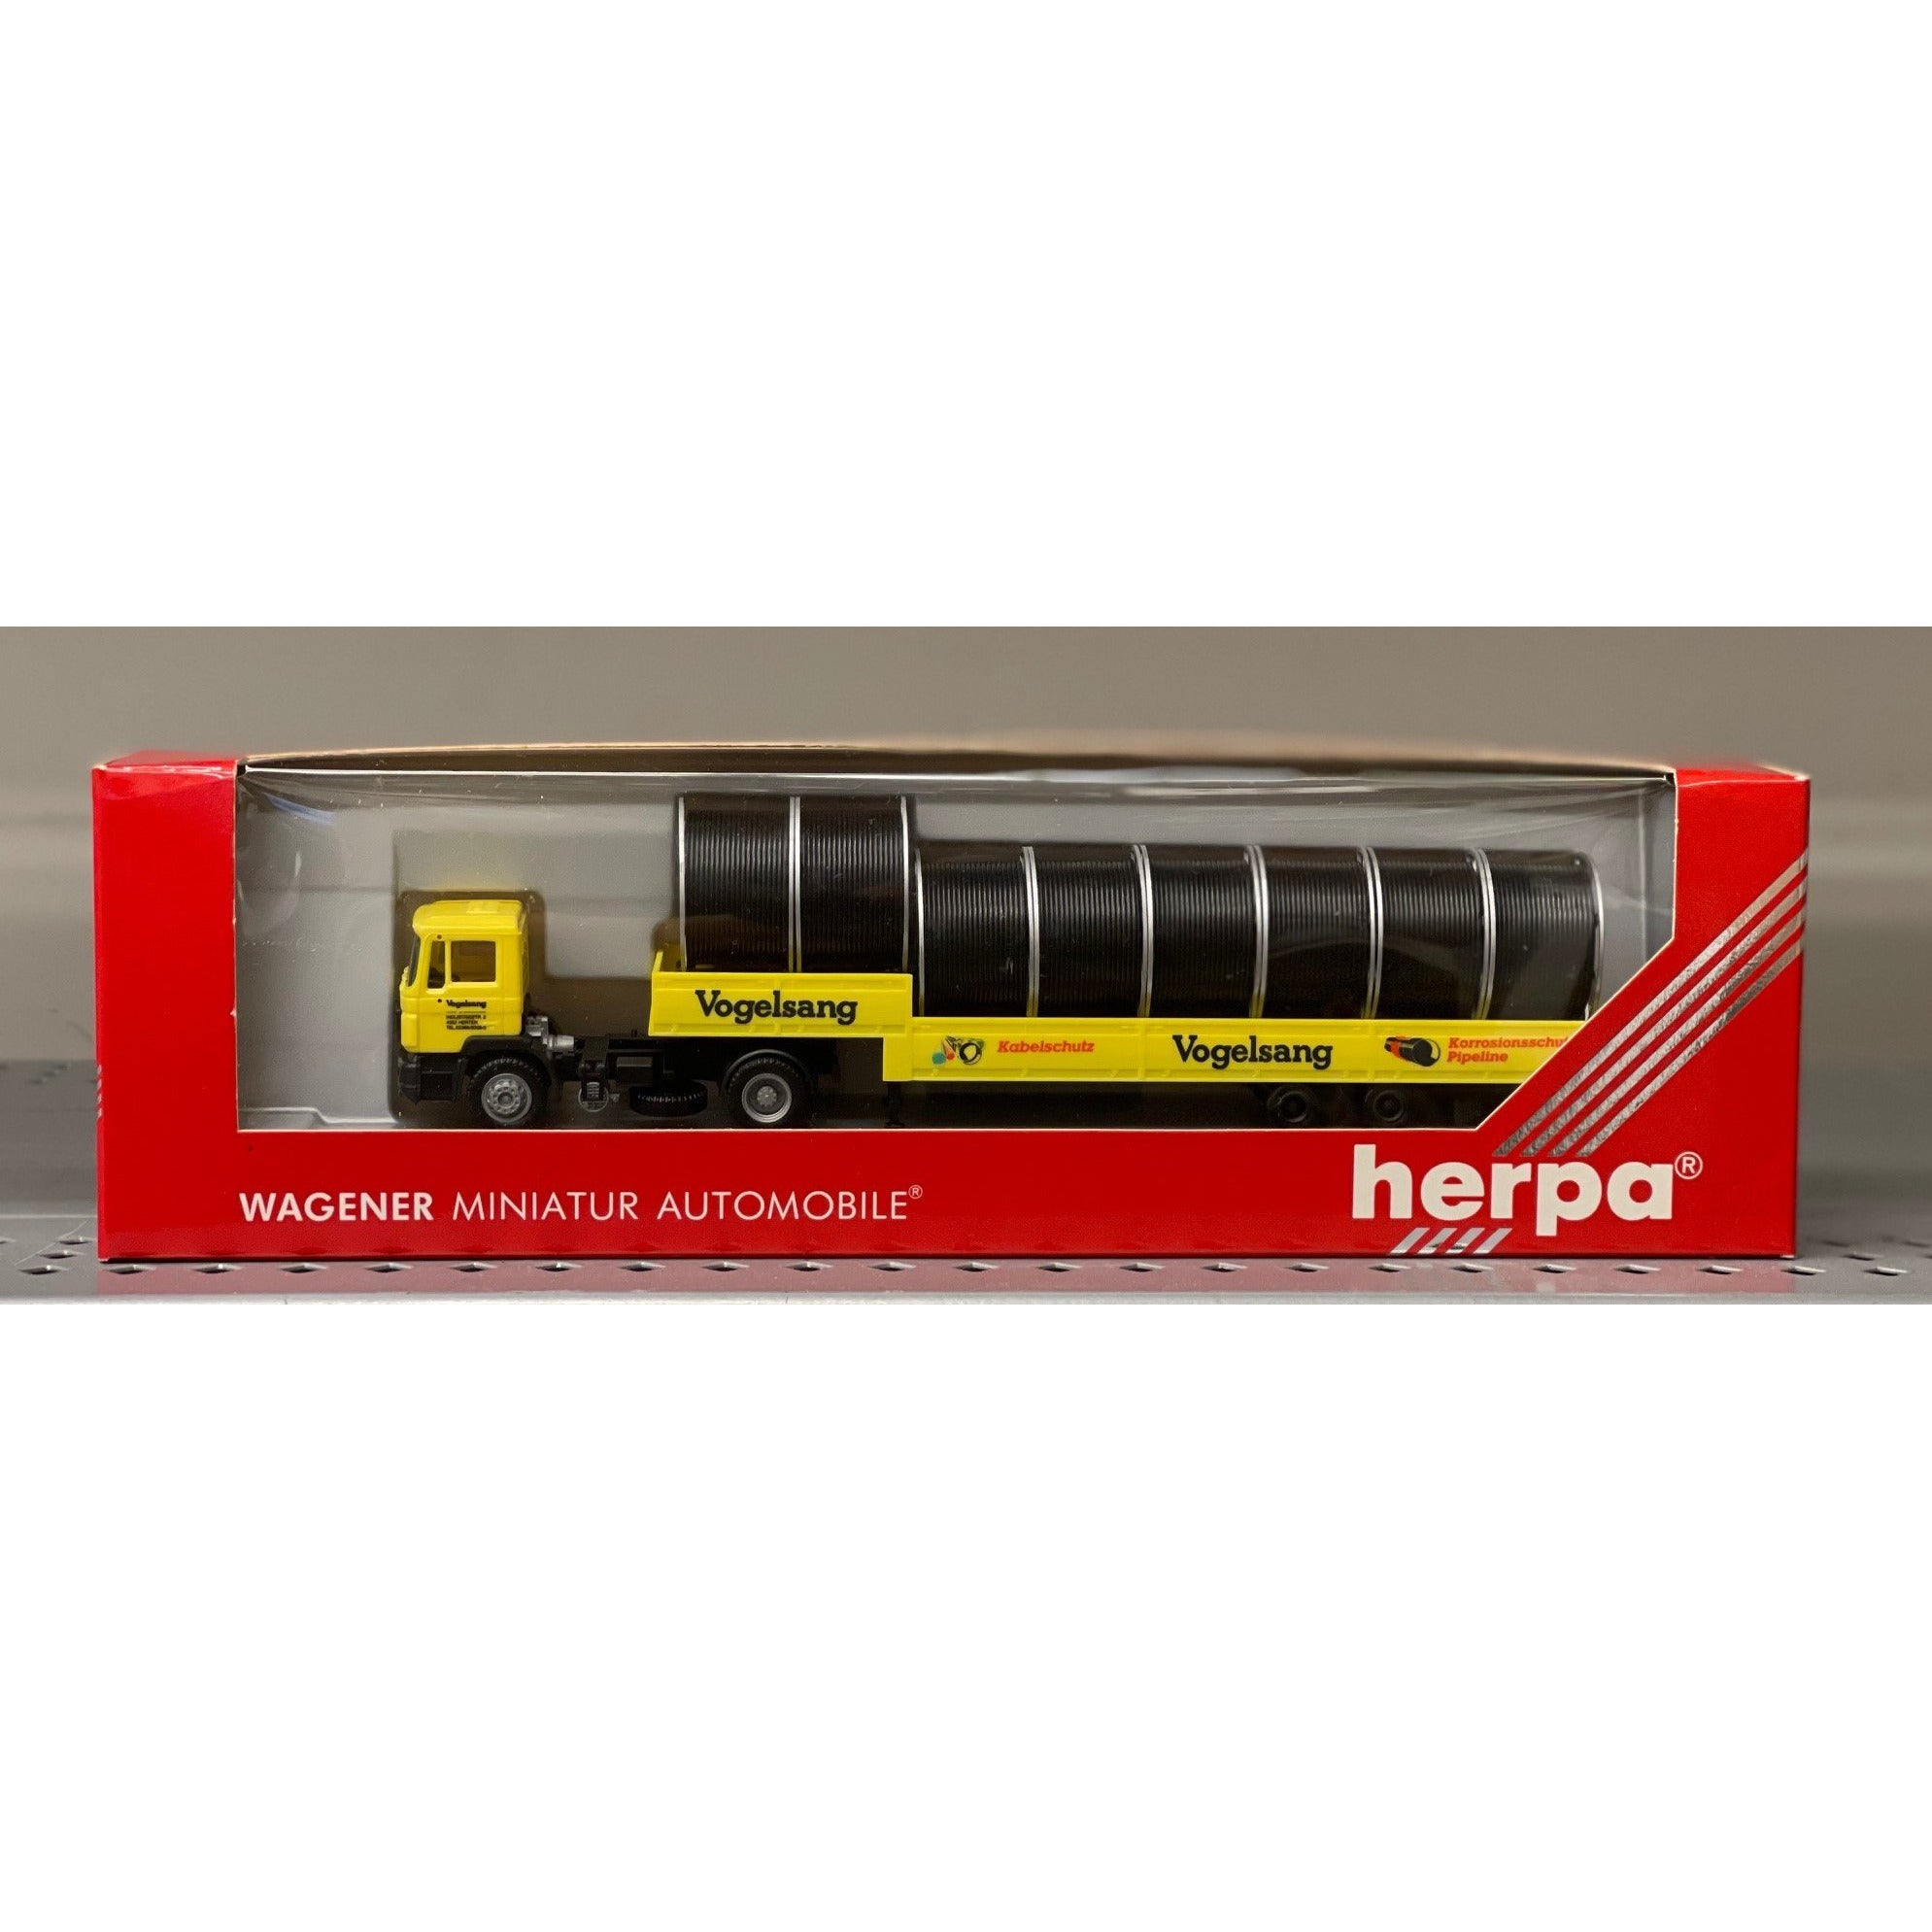 Herpa Wagener Miniature Automobile 1:87 (HO) #864008 Vogelsang Flat Bed with Cable Drums